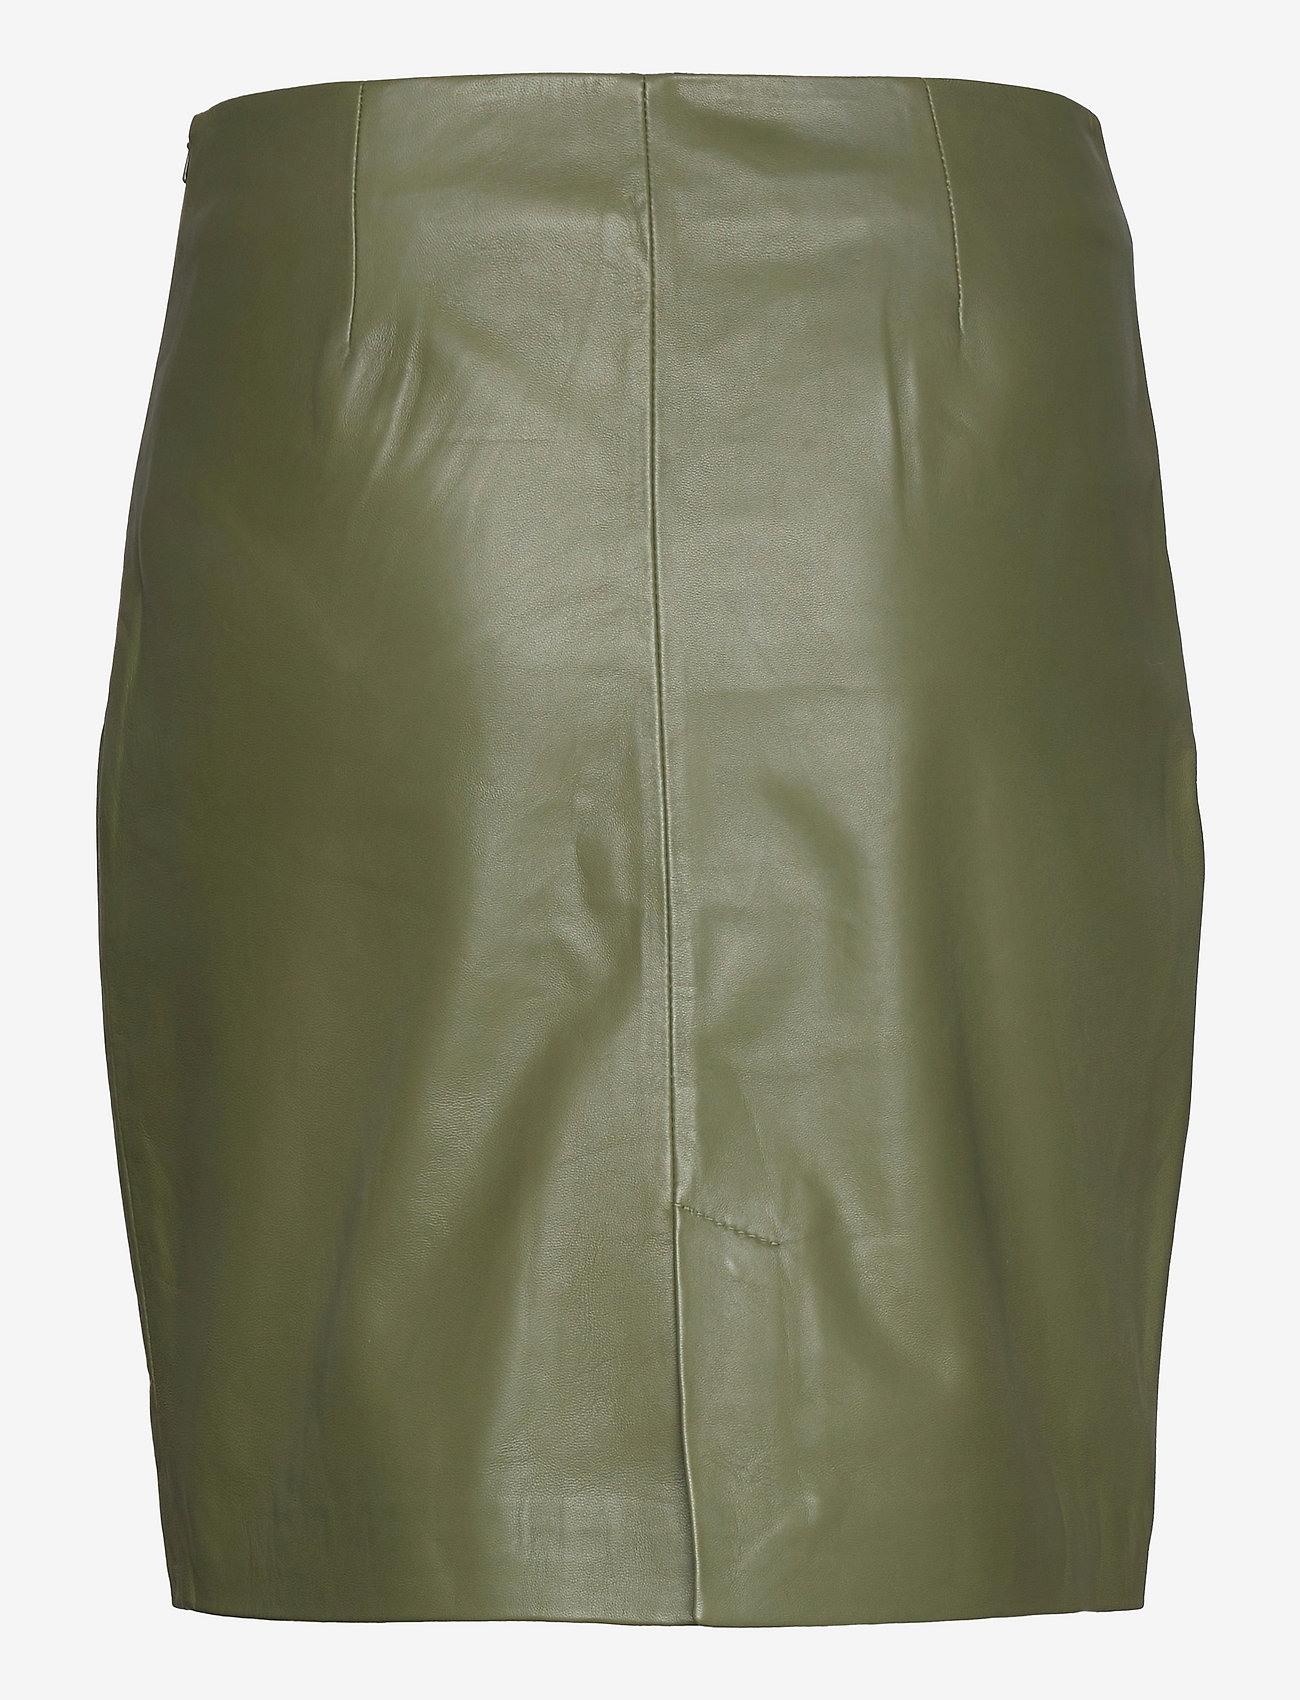 2NDDAY - 2ND Electra - leather skirts - olivine - 1